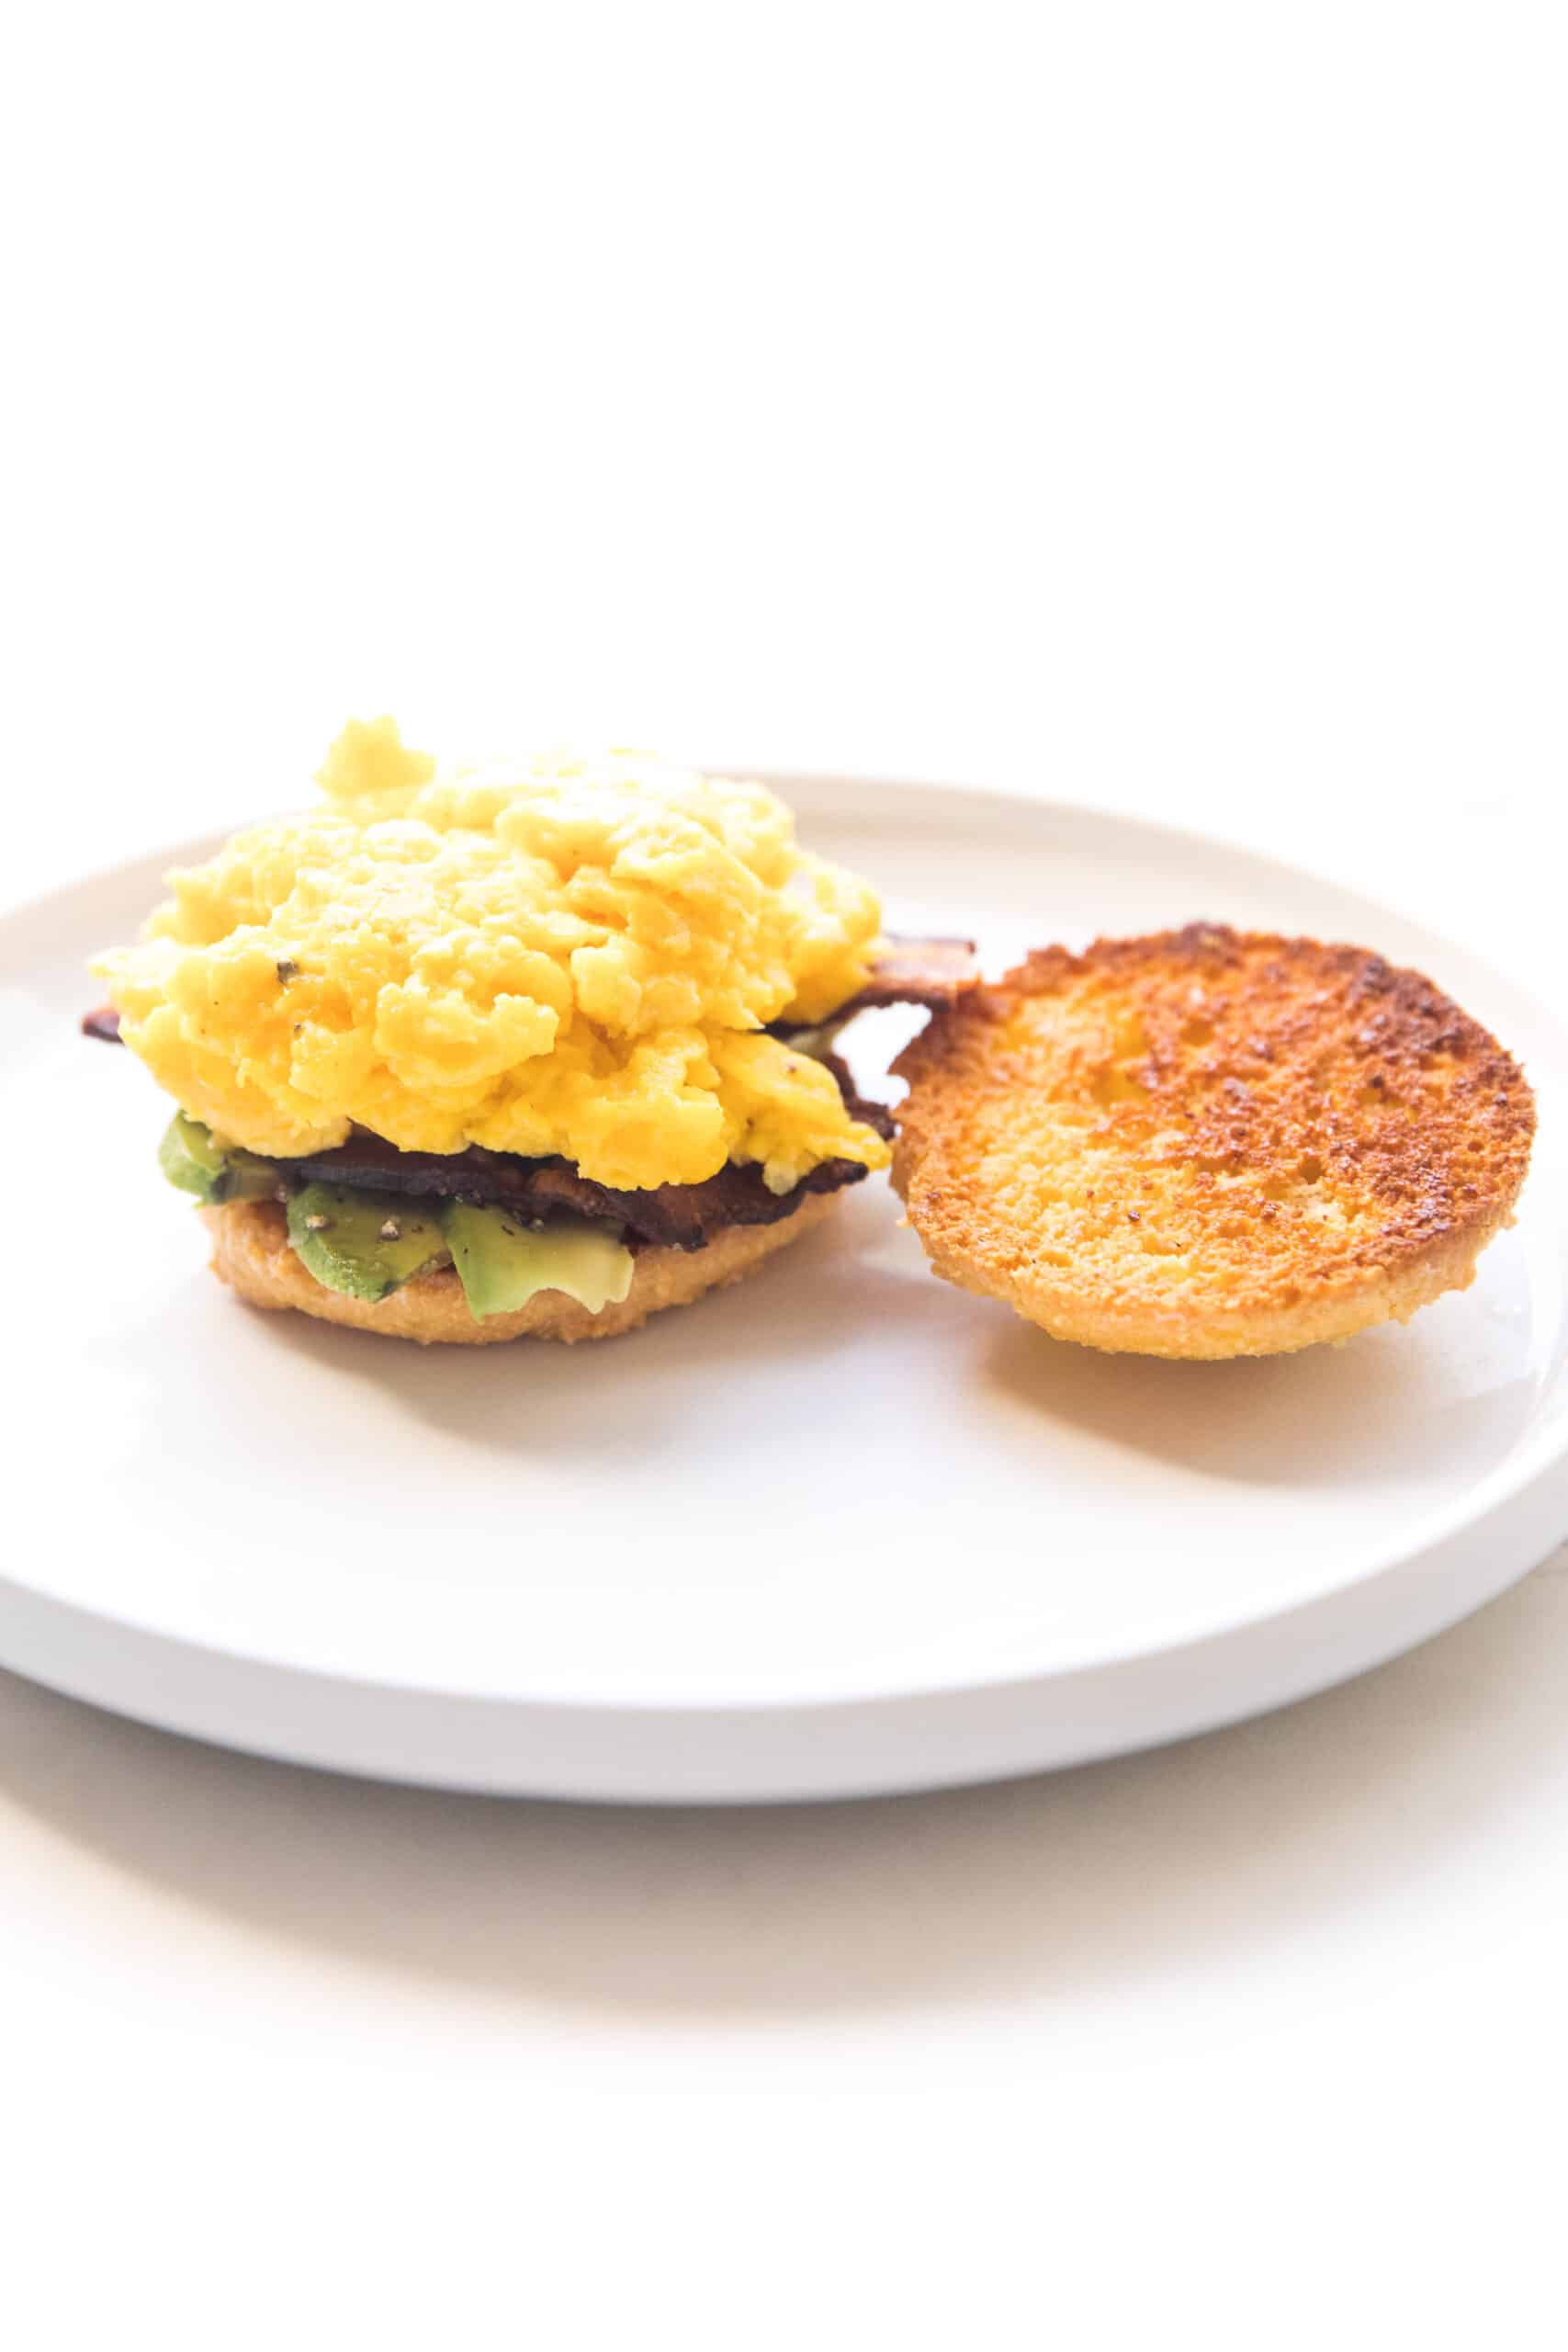 keto biscuit breakfast sandwich with egg, bacon and avocado on a white plate and background